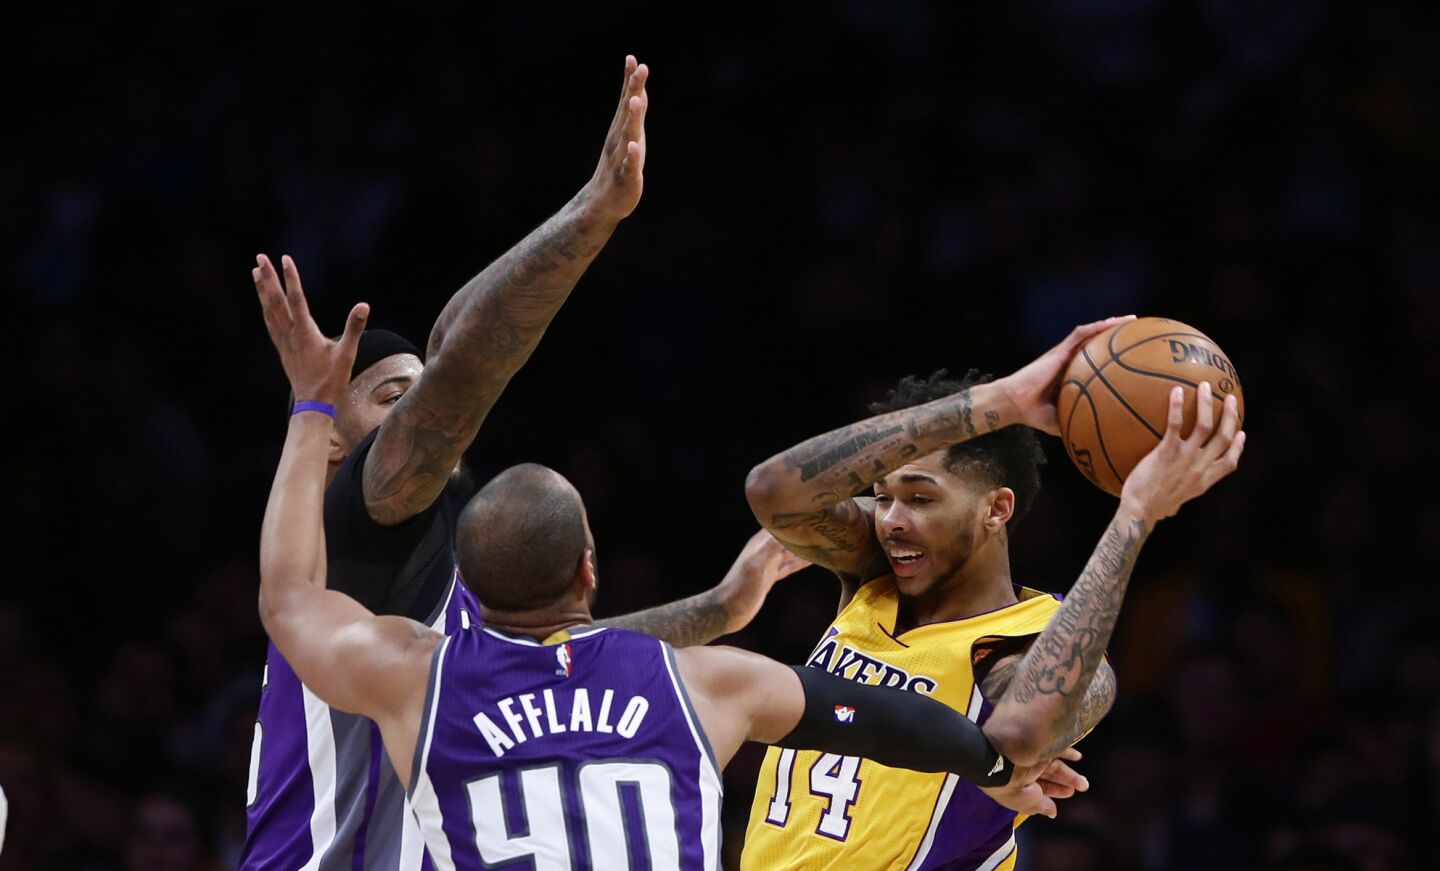 Lakers rookie Brandon Ingram is double-teamed by Kings forward Arron Afflalo (40) and center DeMarcus Cousins during the first half of a game at Staples Center on Feb. 14.